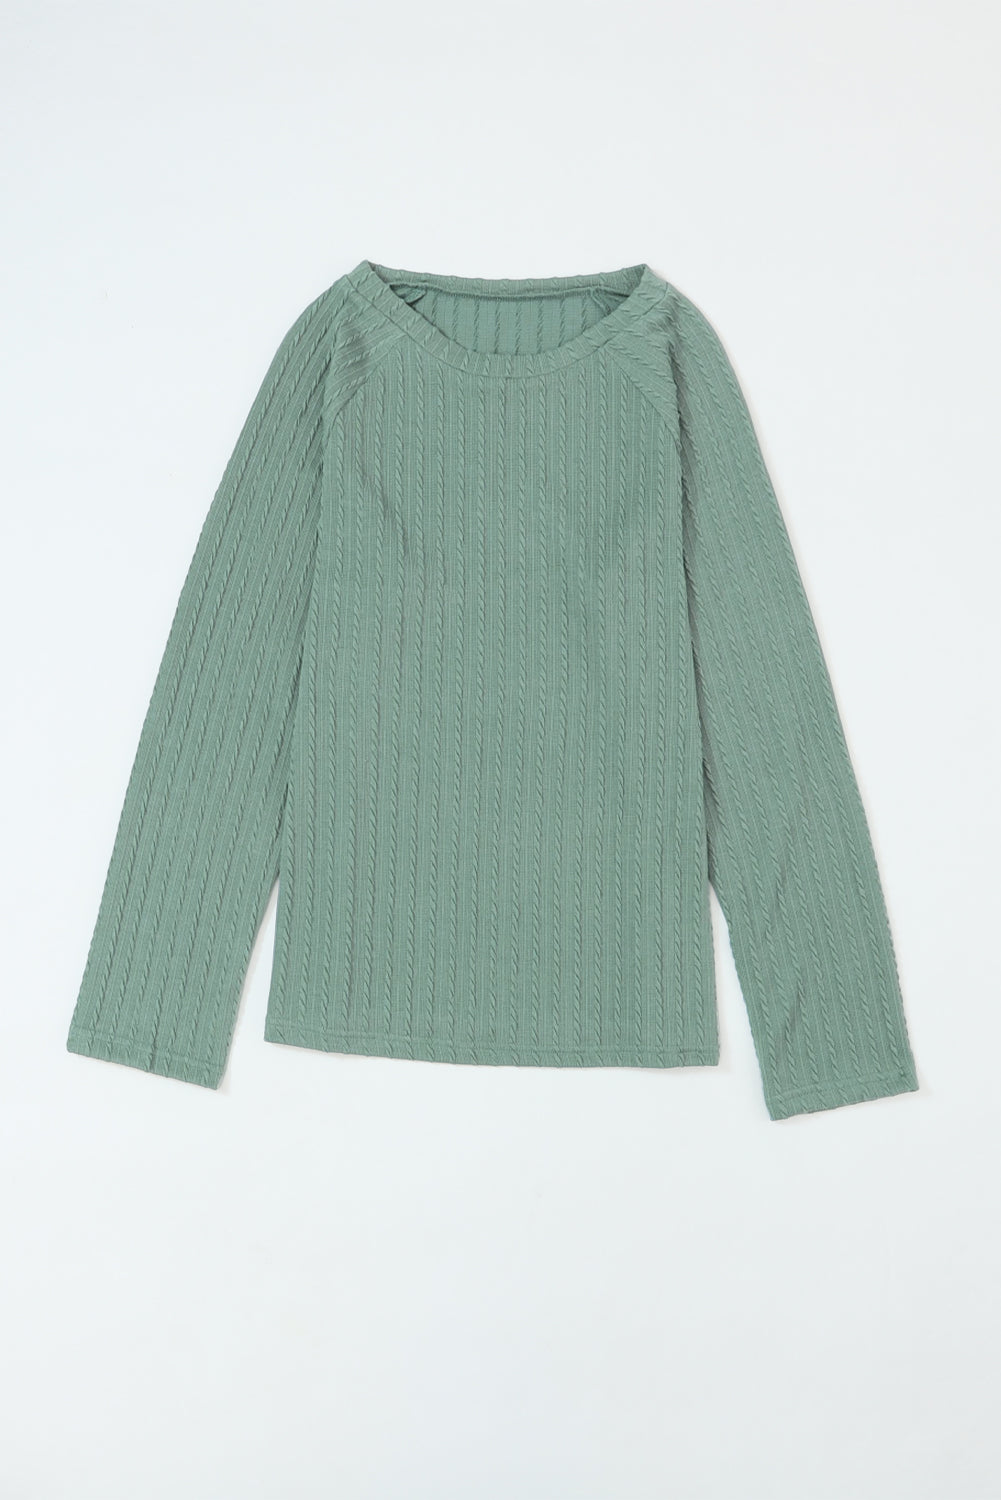 Green Ribbed Round Neck Knit Long Sleeve Top-4